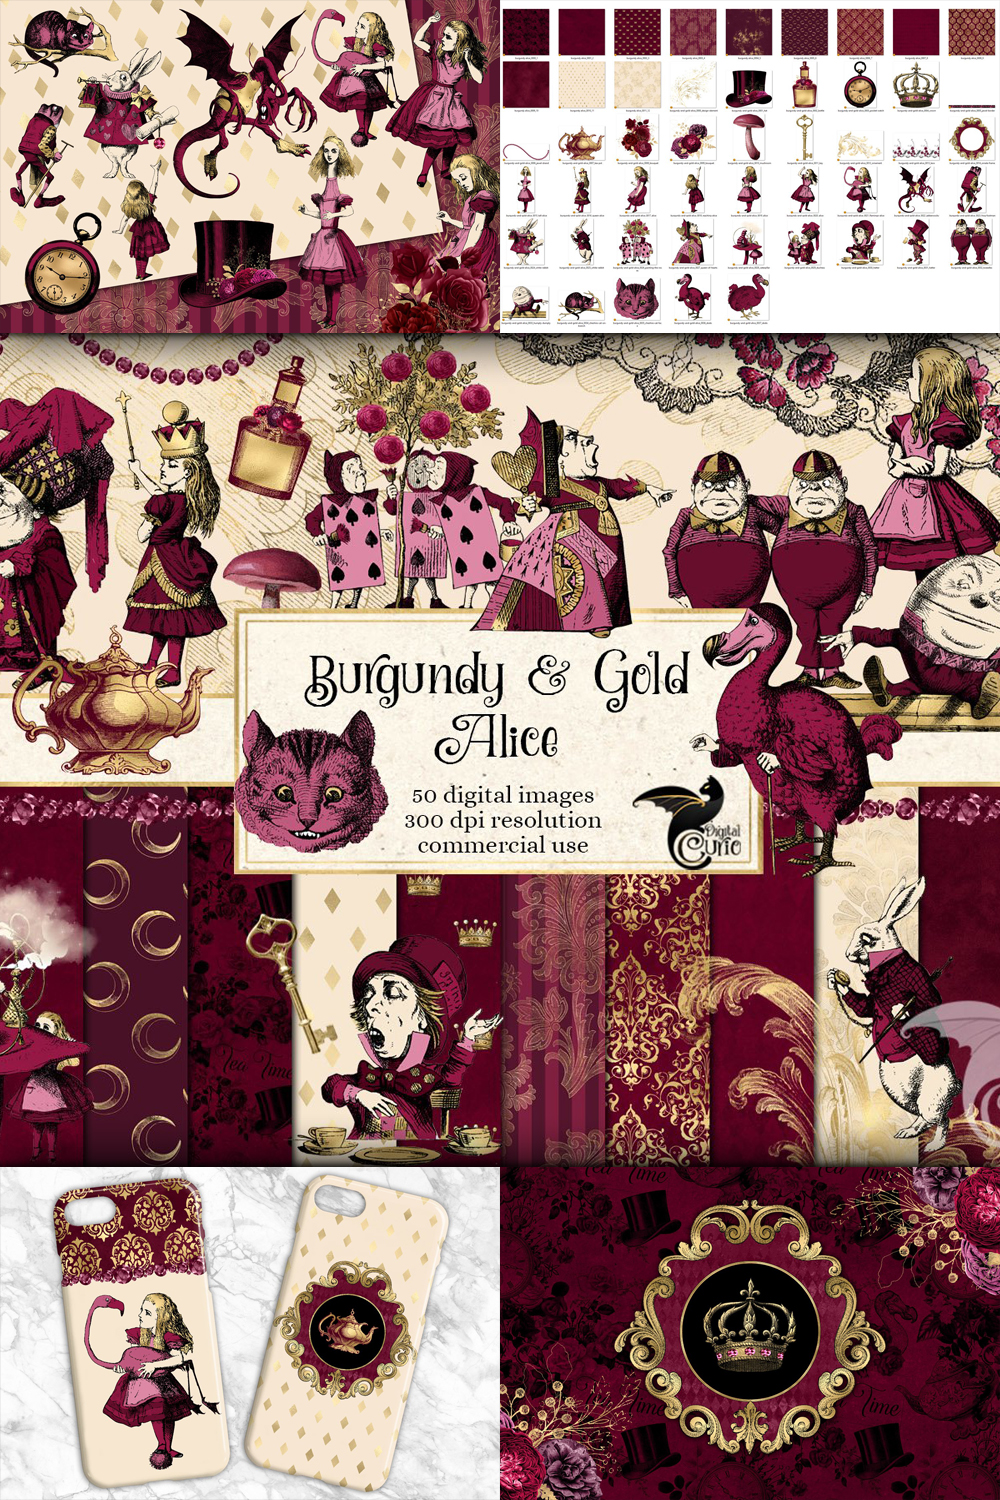 Burgundy and gold alice in wonderland graphics of pinterest.